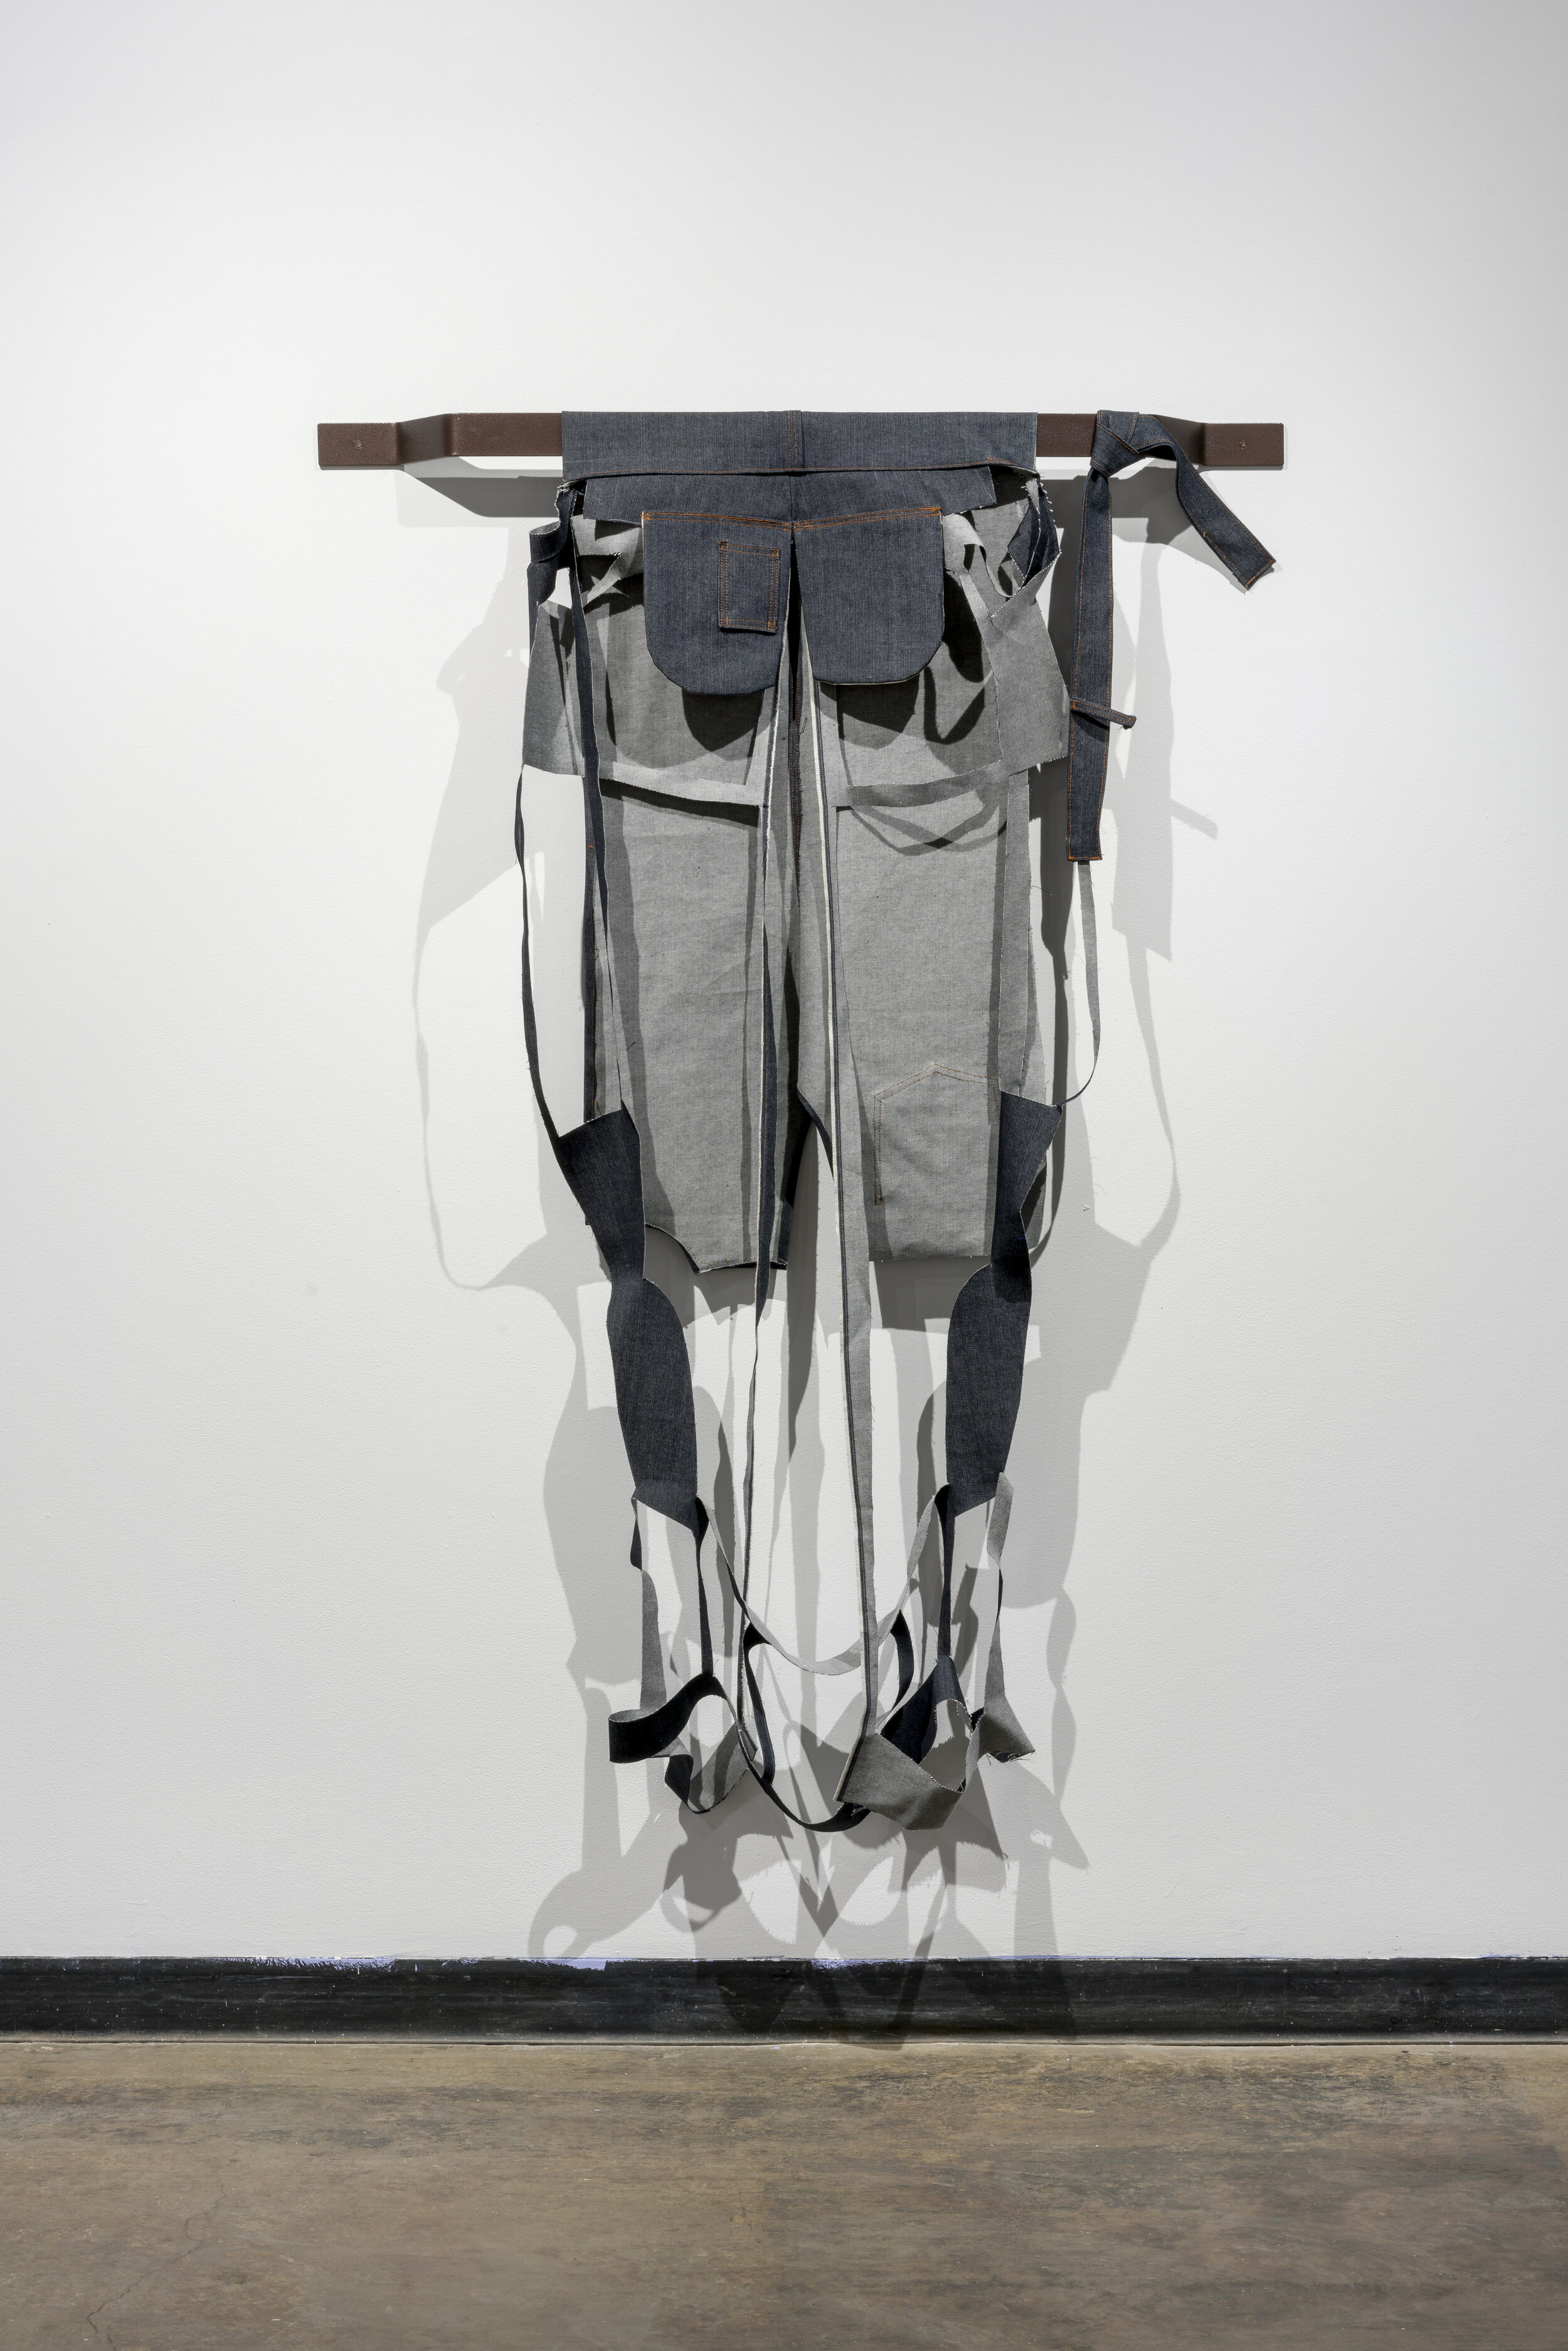  This is a hanging piece made by deconstructing a pair of grey jeans. Most of the pant legs have been cut away, leaving outlines of them through thin strips of fabric. What seems to be intact from the jeans in this piece are the waistband, the back p